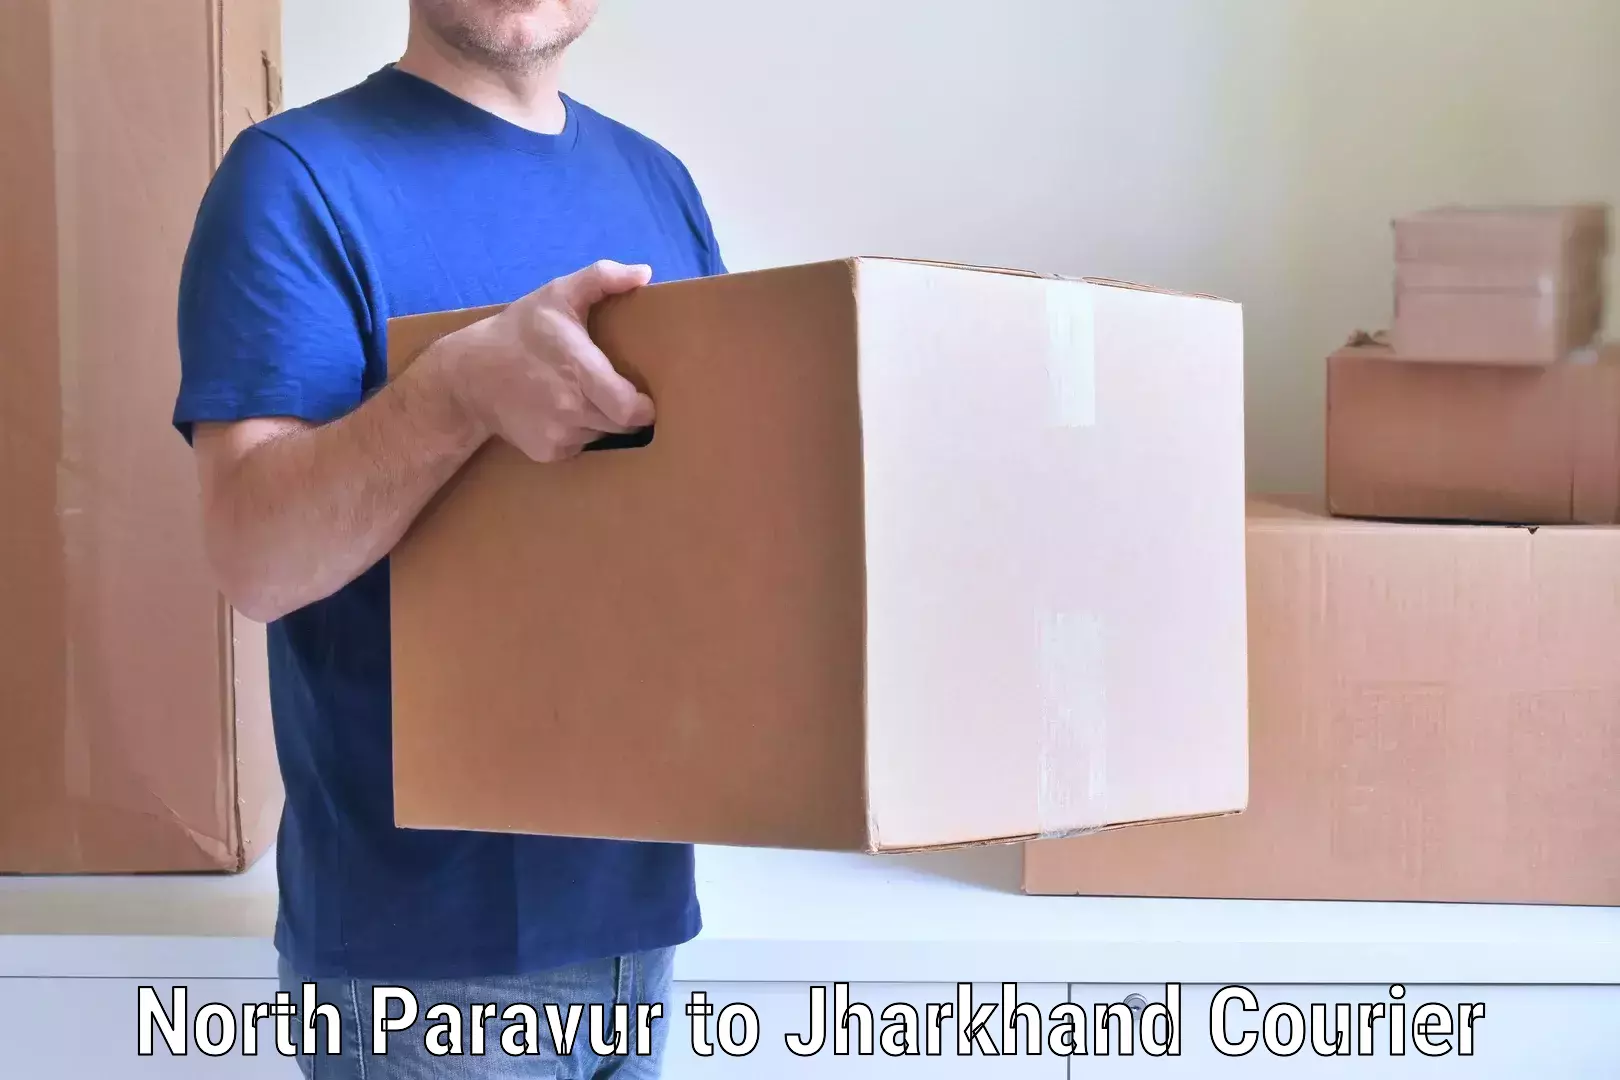 Professional moving assistance in North Paravur to Poreyahat